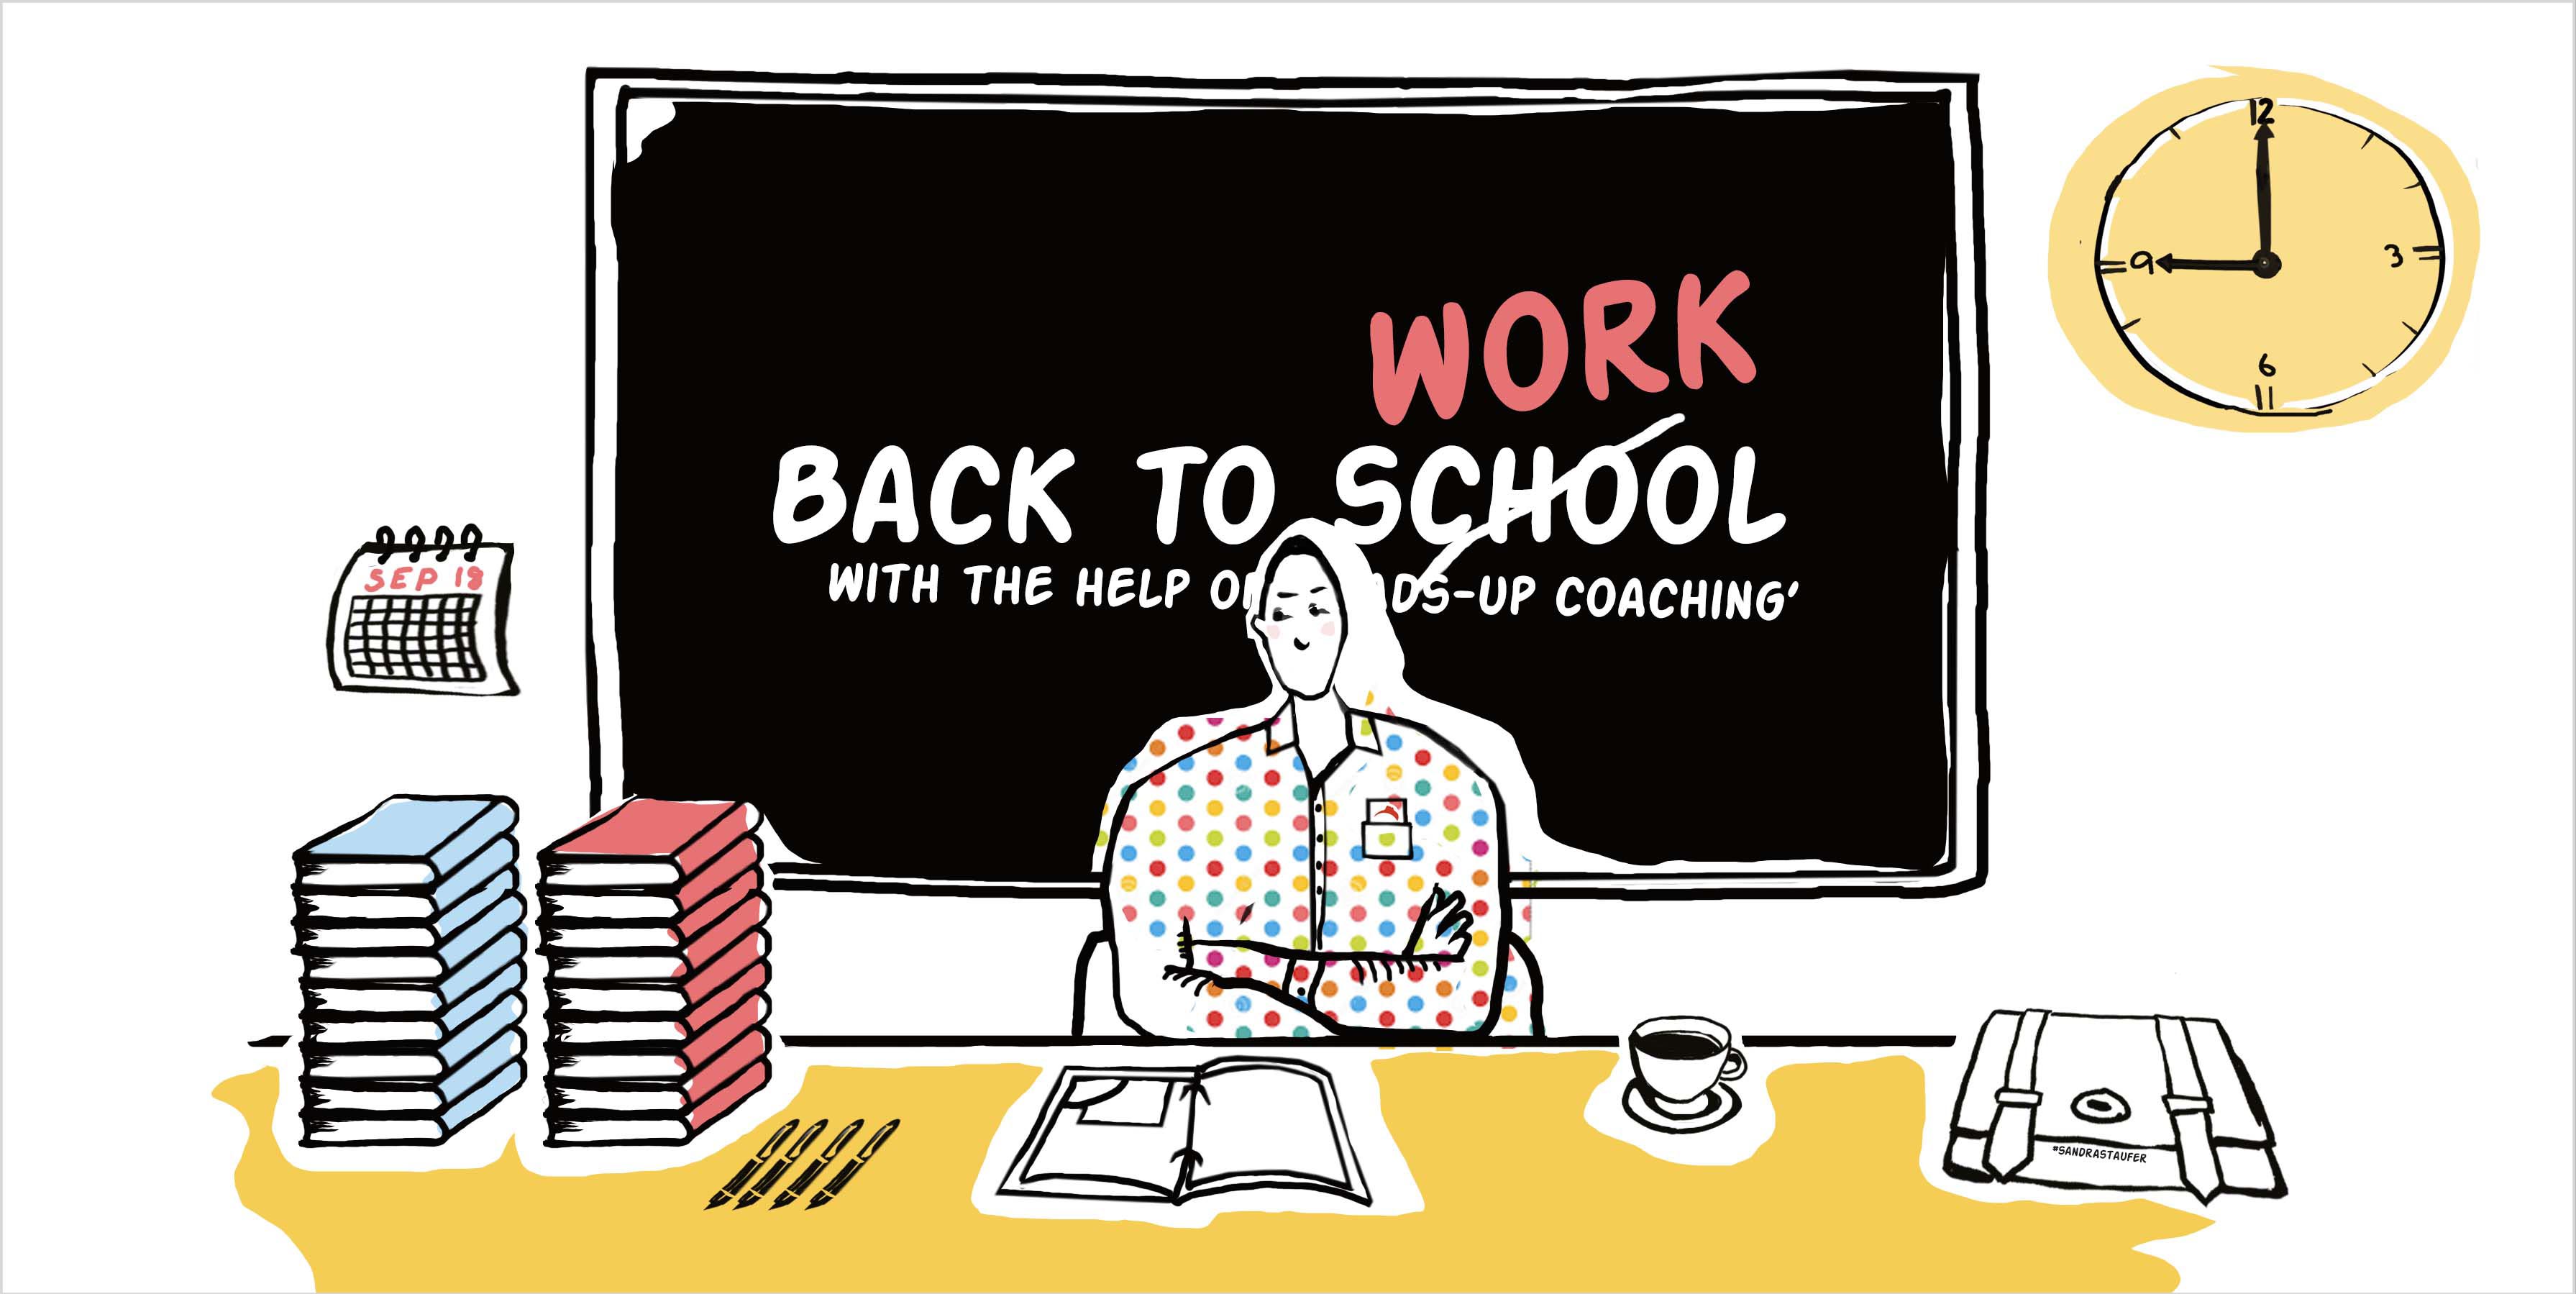 ILLUSTRATION BY SANDRA STAUFER FOR HEADS-UP COACHING